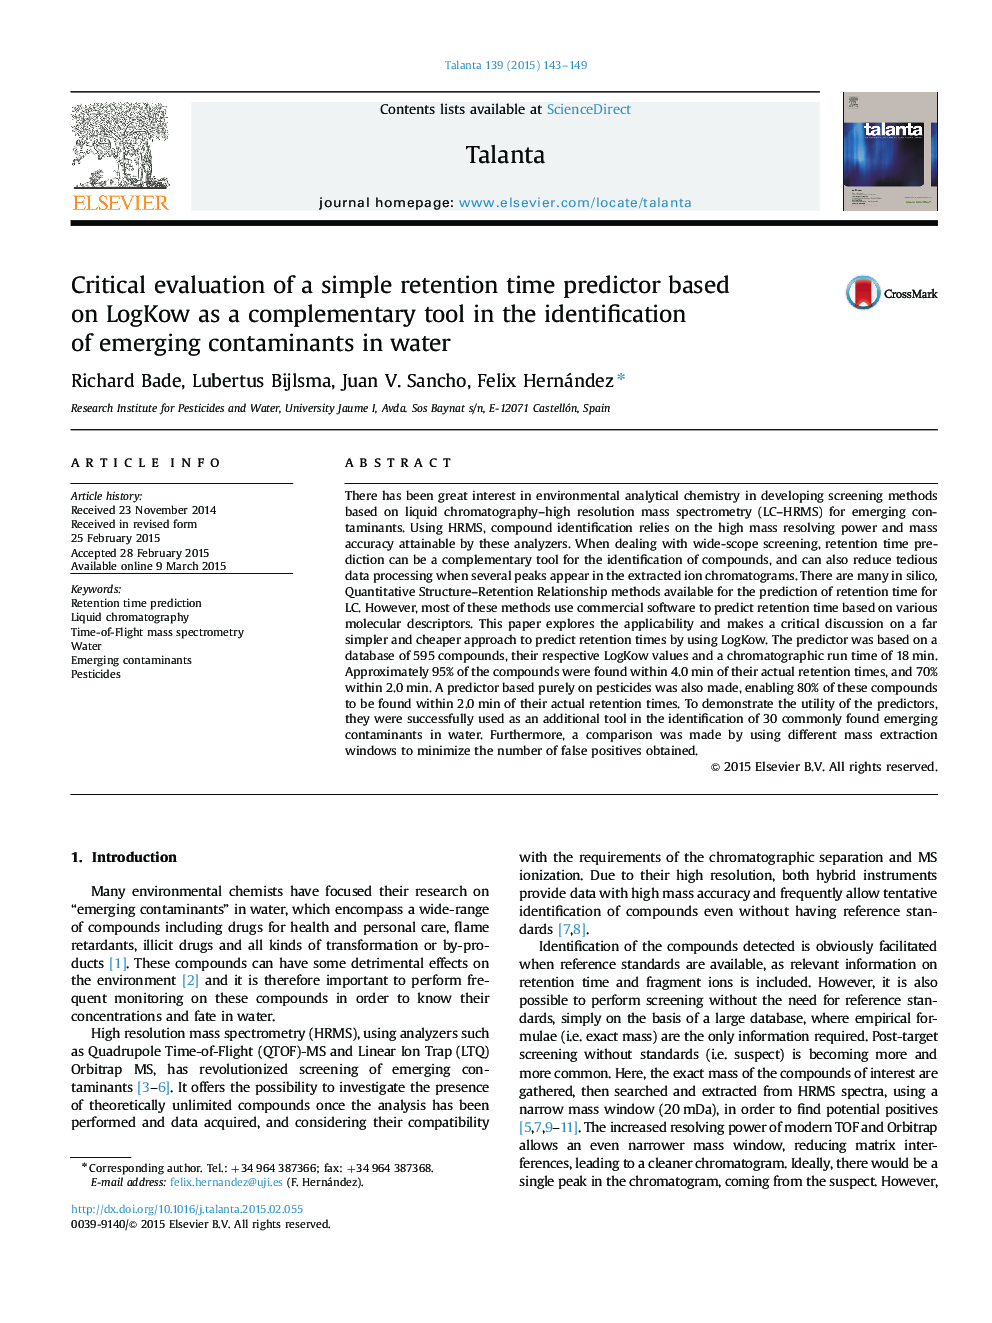 Critical evaluation of a simple retention time predictor based on LogKow as a complementary tool in the identification of emerging contaminants in water